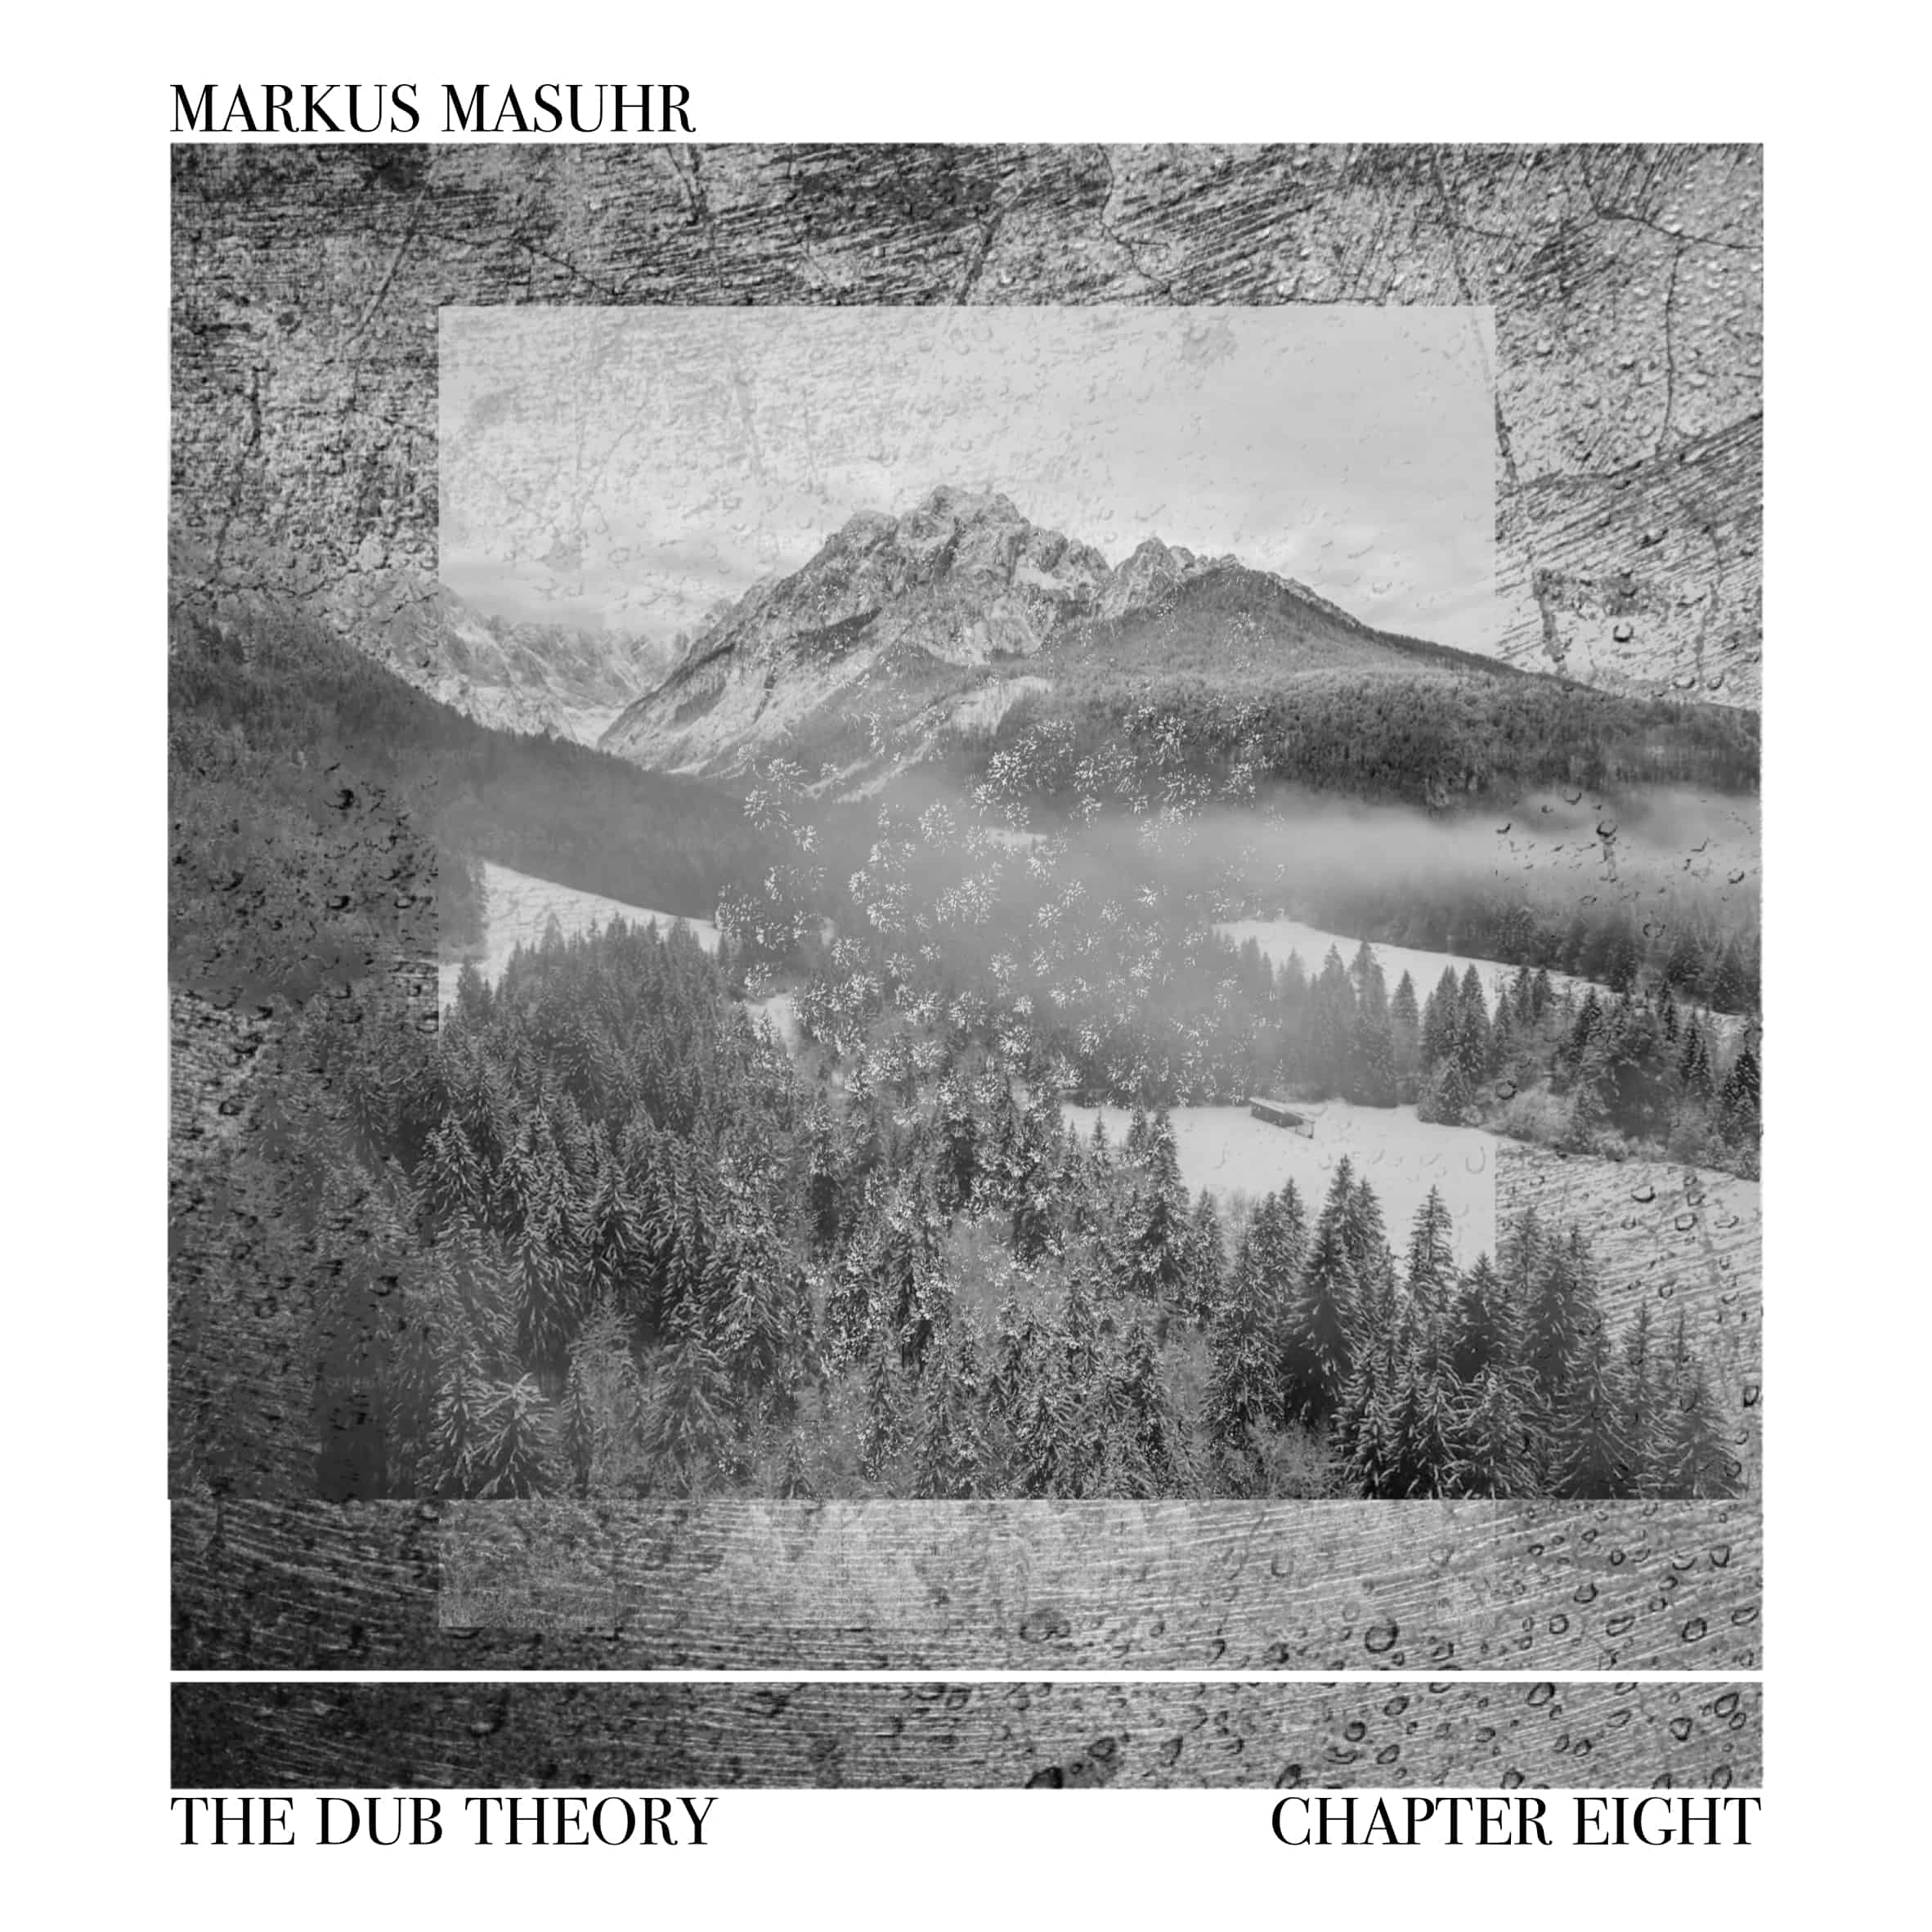 image cover: Markus Masuhr - The Dub Theory "Chapter Eight"